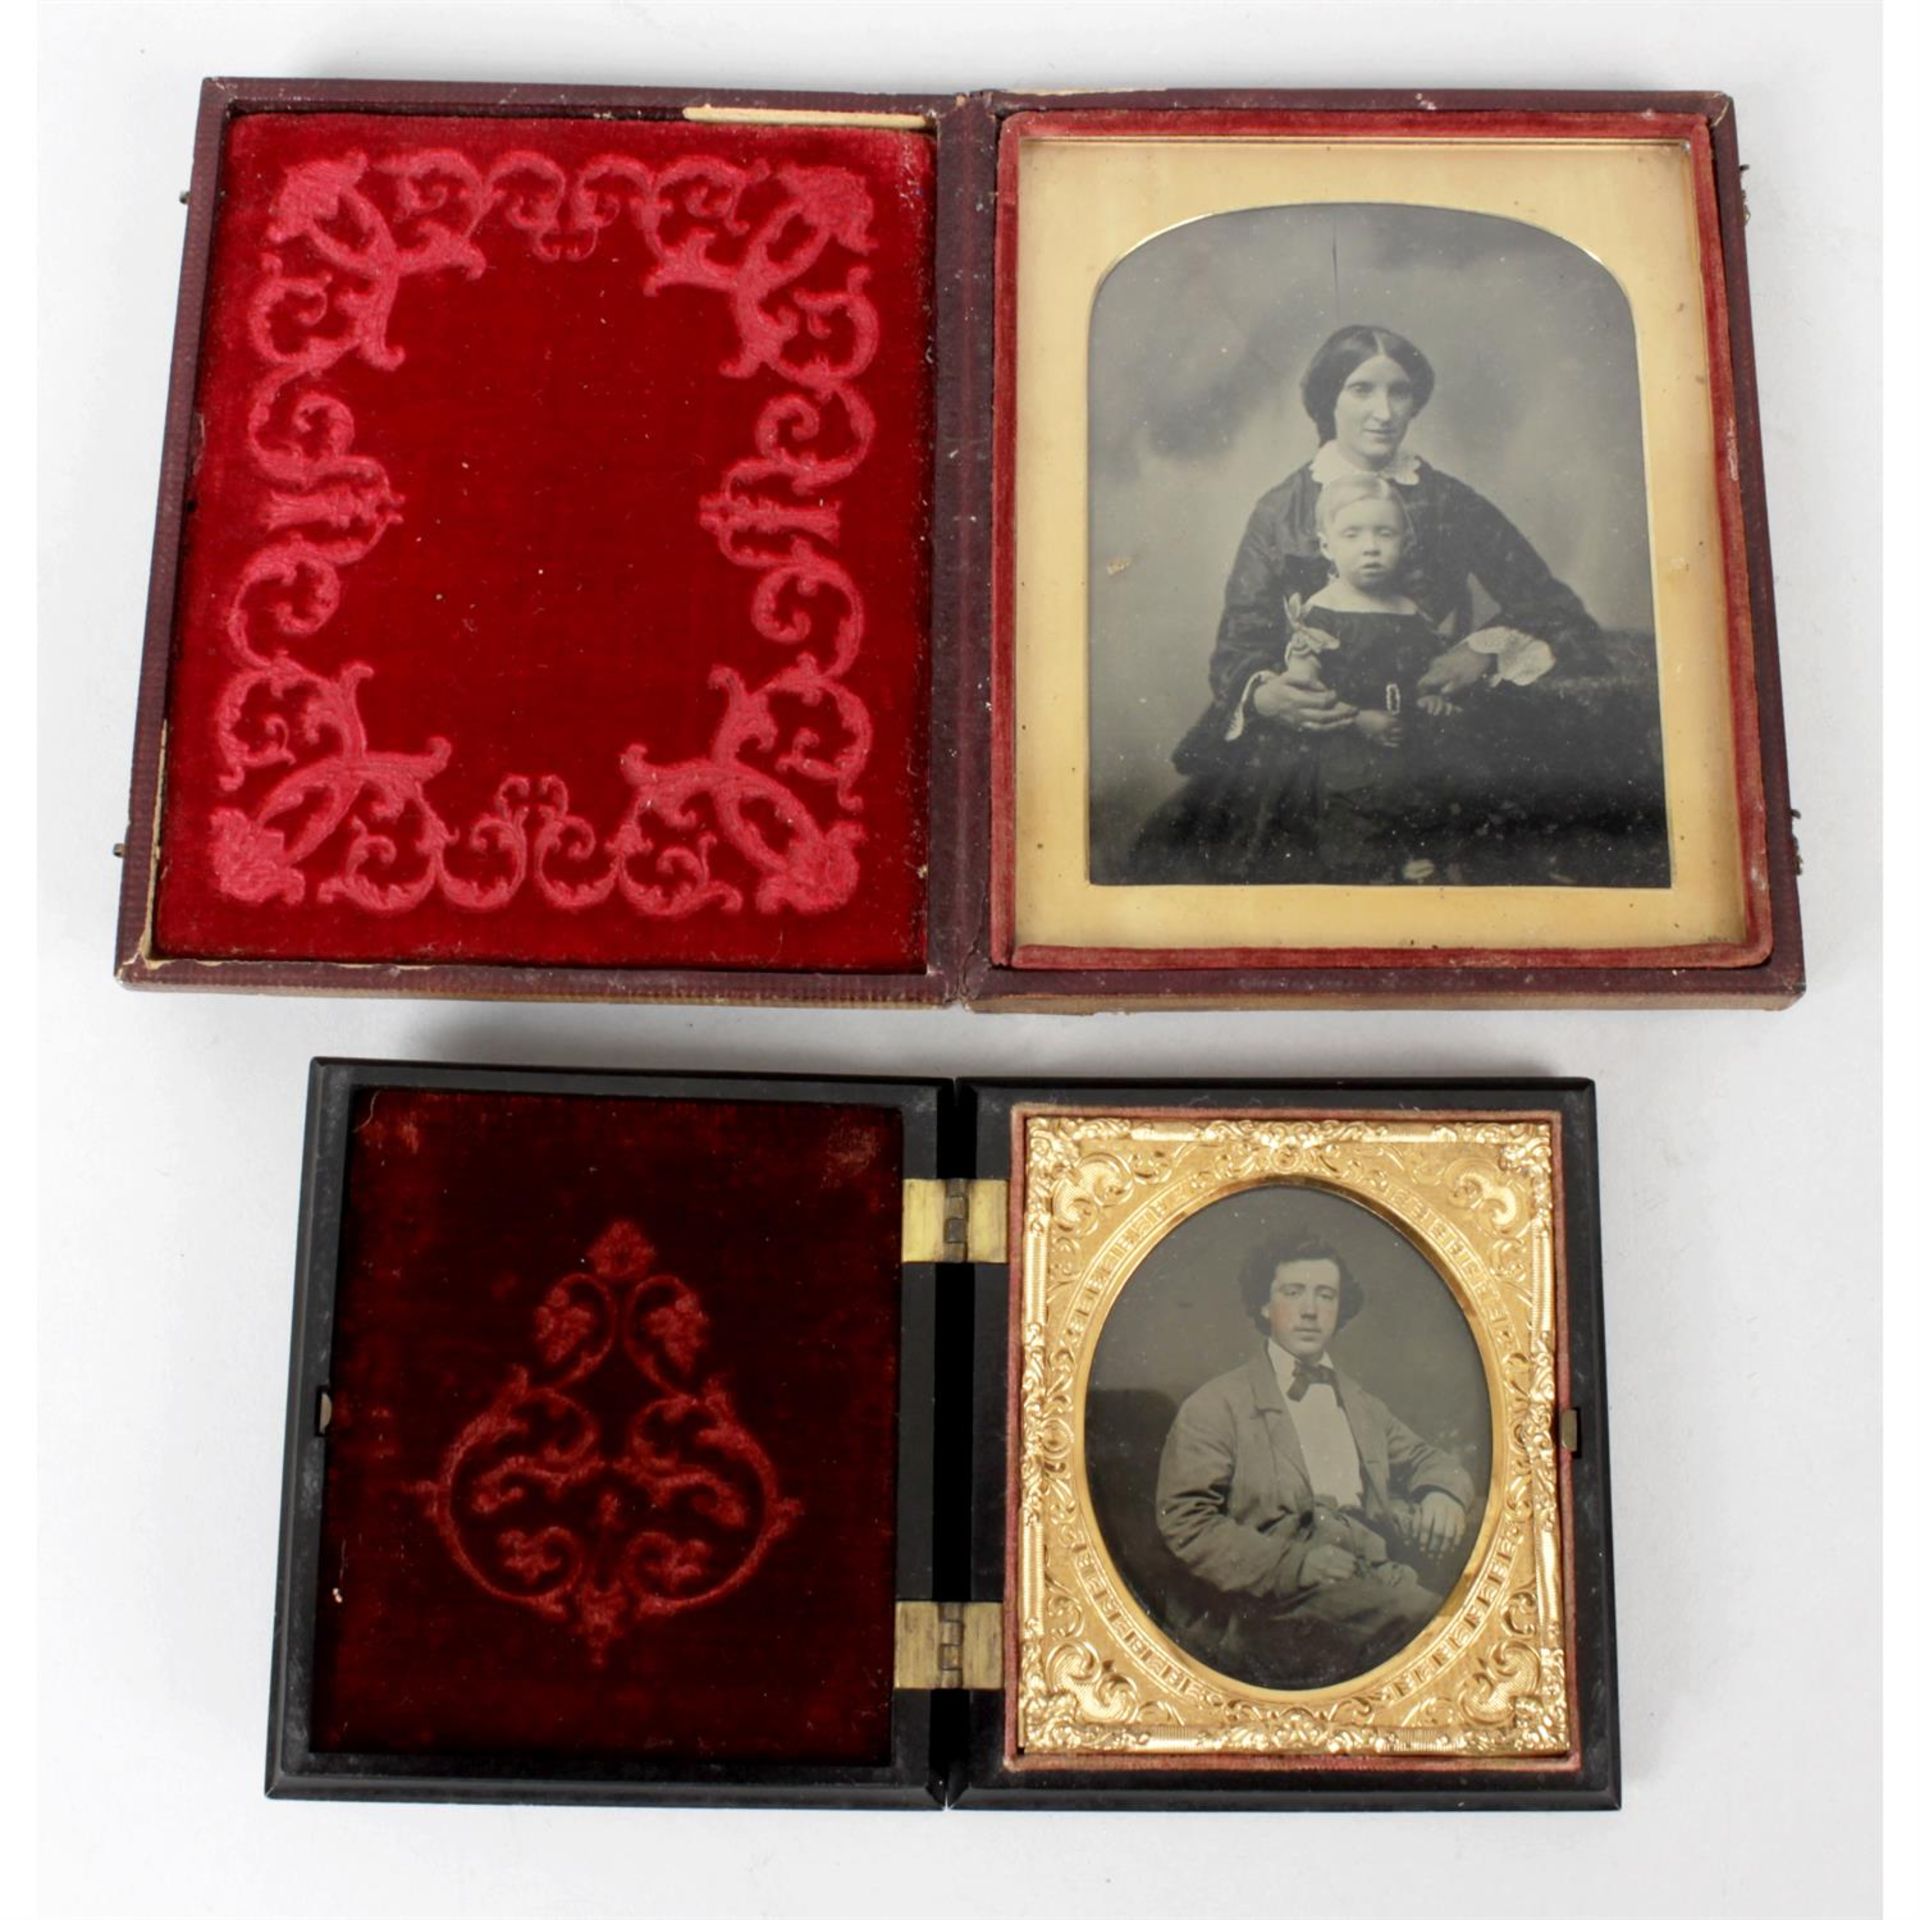 Two 19th century hinge cased photographs.